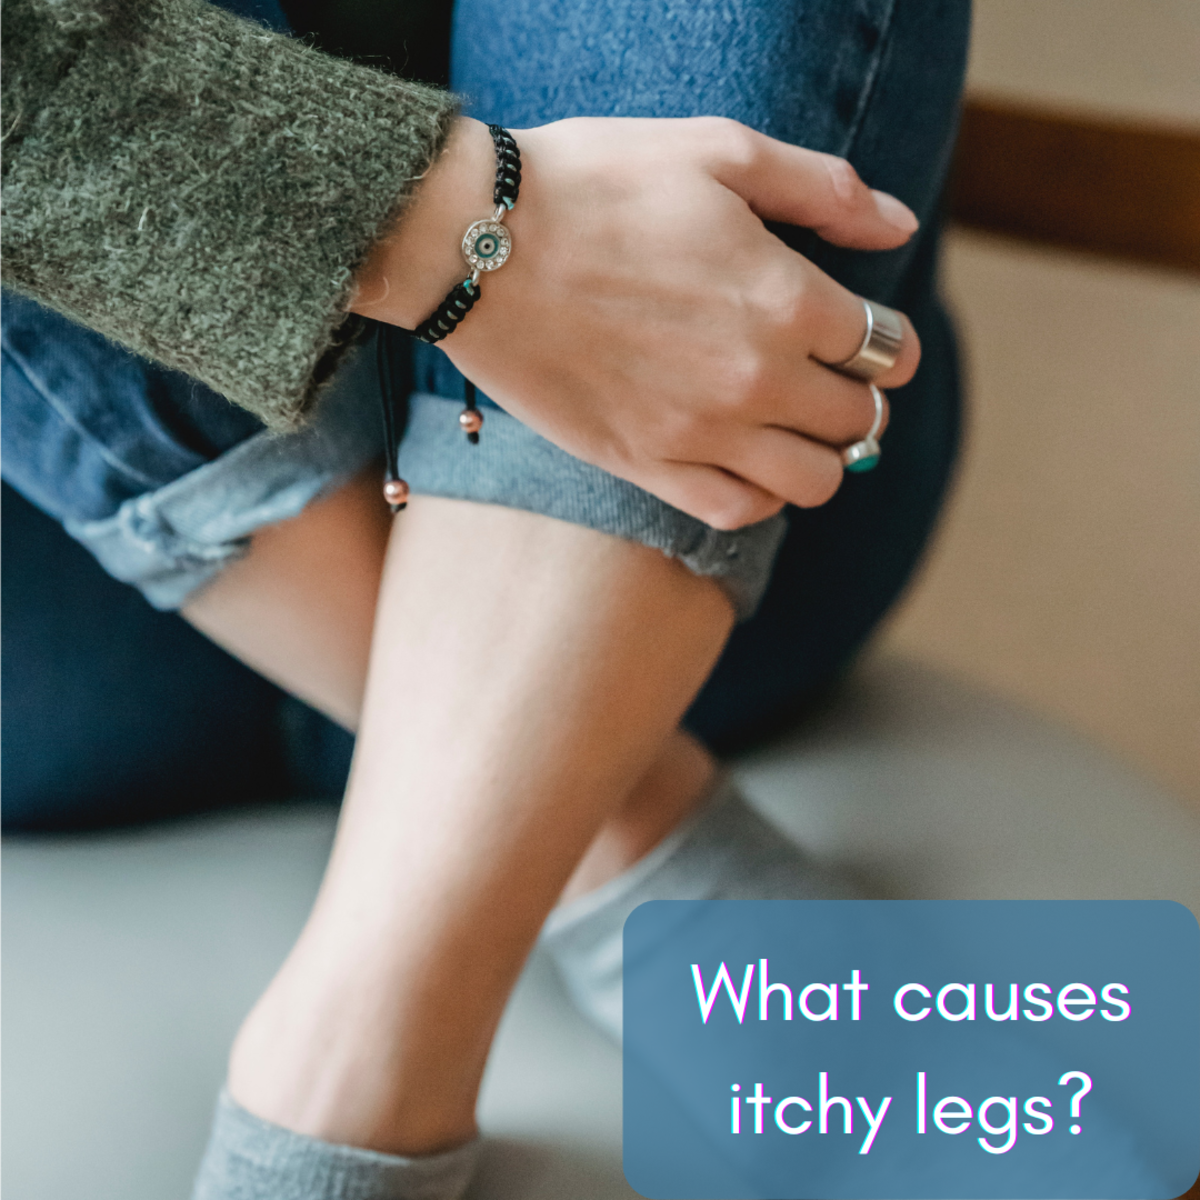 Let's look at the most common causes of itchy legs.